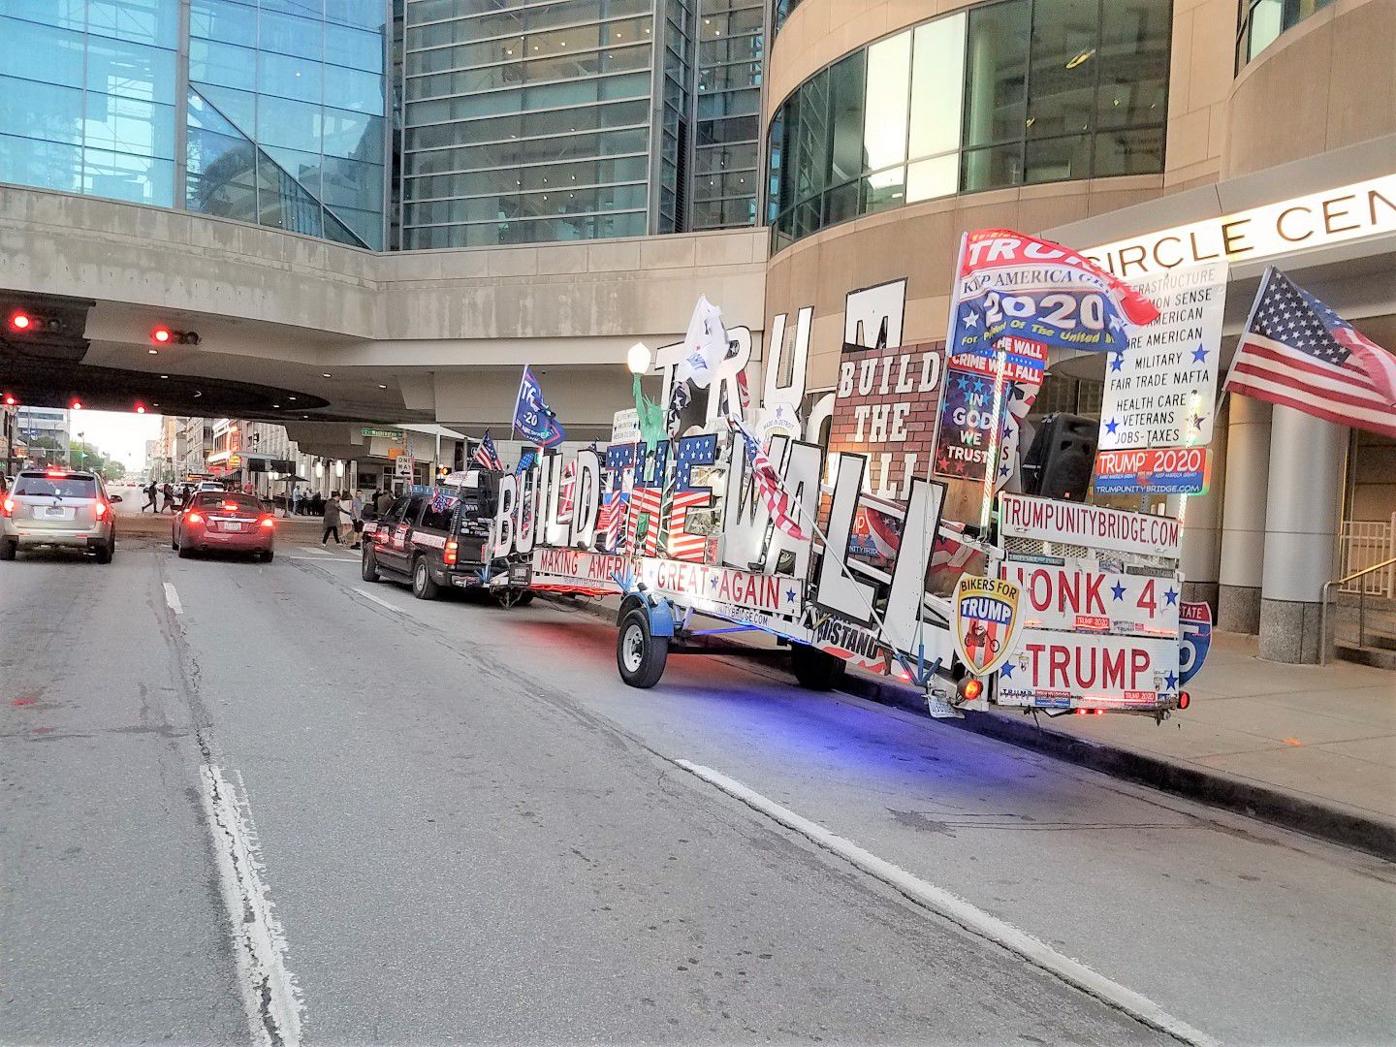 The Trump Unity Bridge trailer at Circle City Mall in Downtown Indianapolis